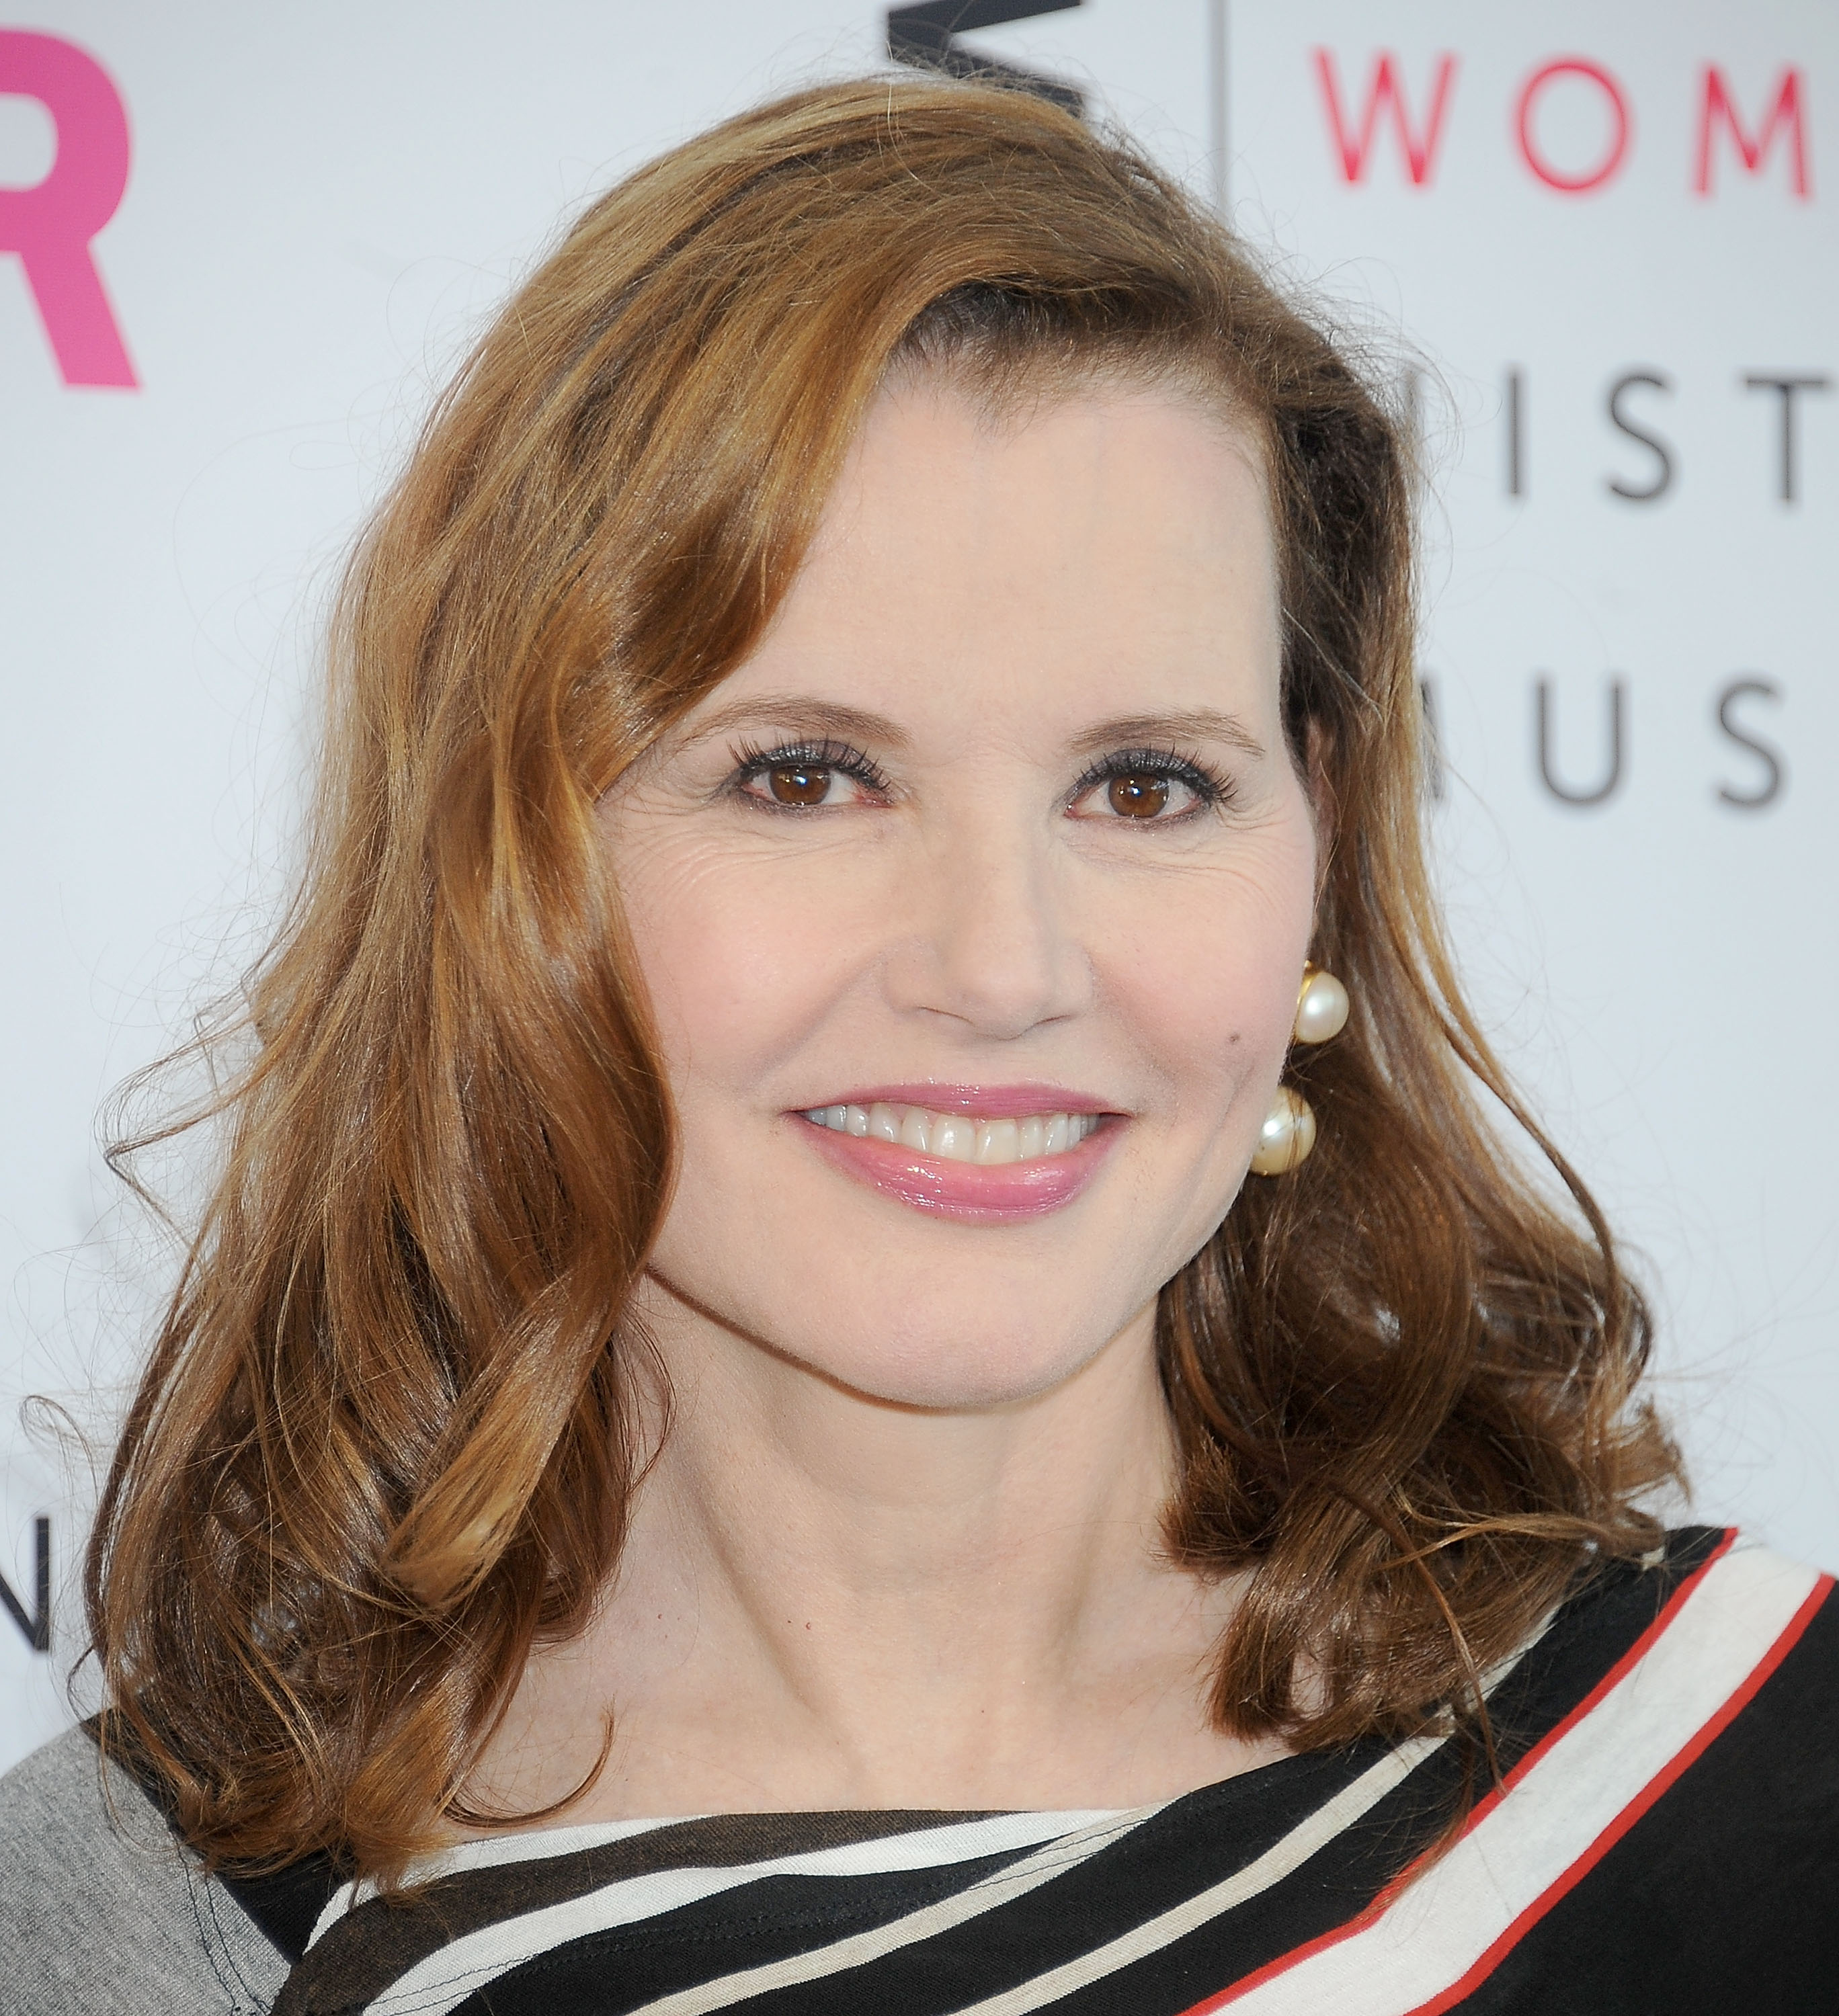 Actress Geena Davis arrives at the National Women's History Museum's 3rd Annual Women Making History event at Skirball Cultural Center on Aug. 23, 2014 in Los Angeles. (Gregg DeGuire—WireImage)